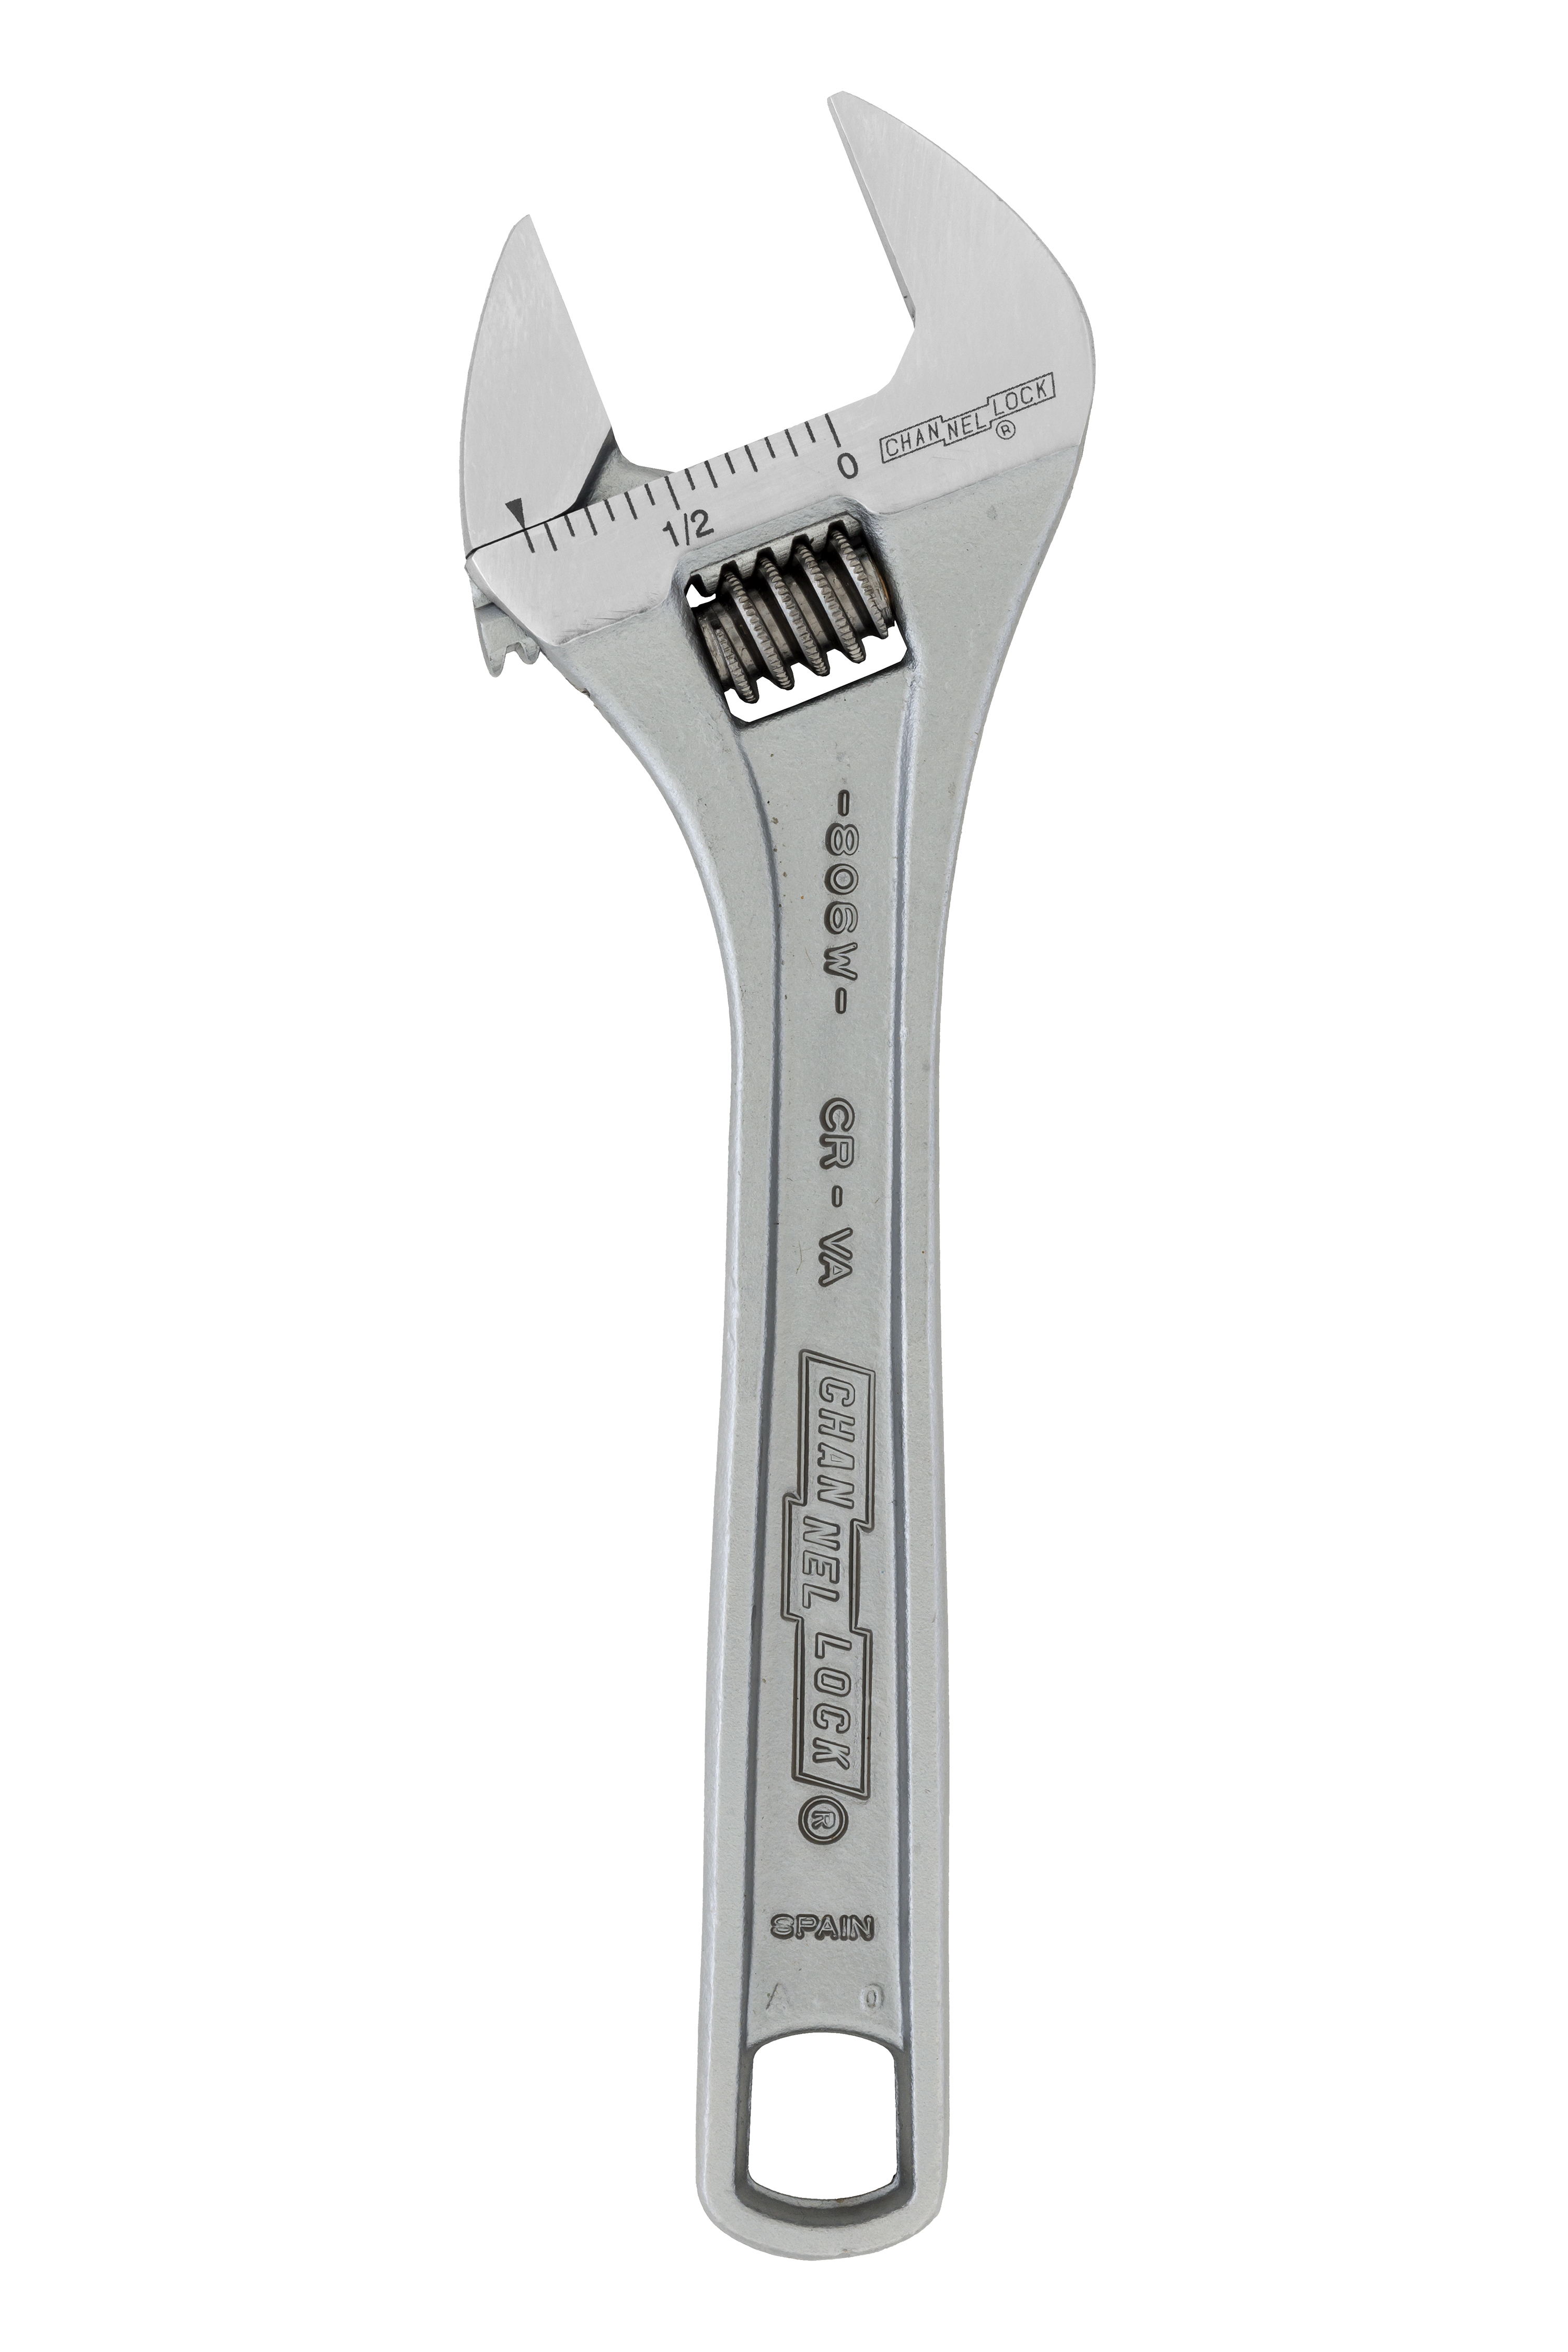 6" Chrome Wide Adjustable Wrench